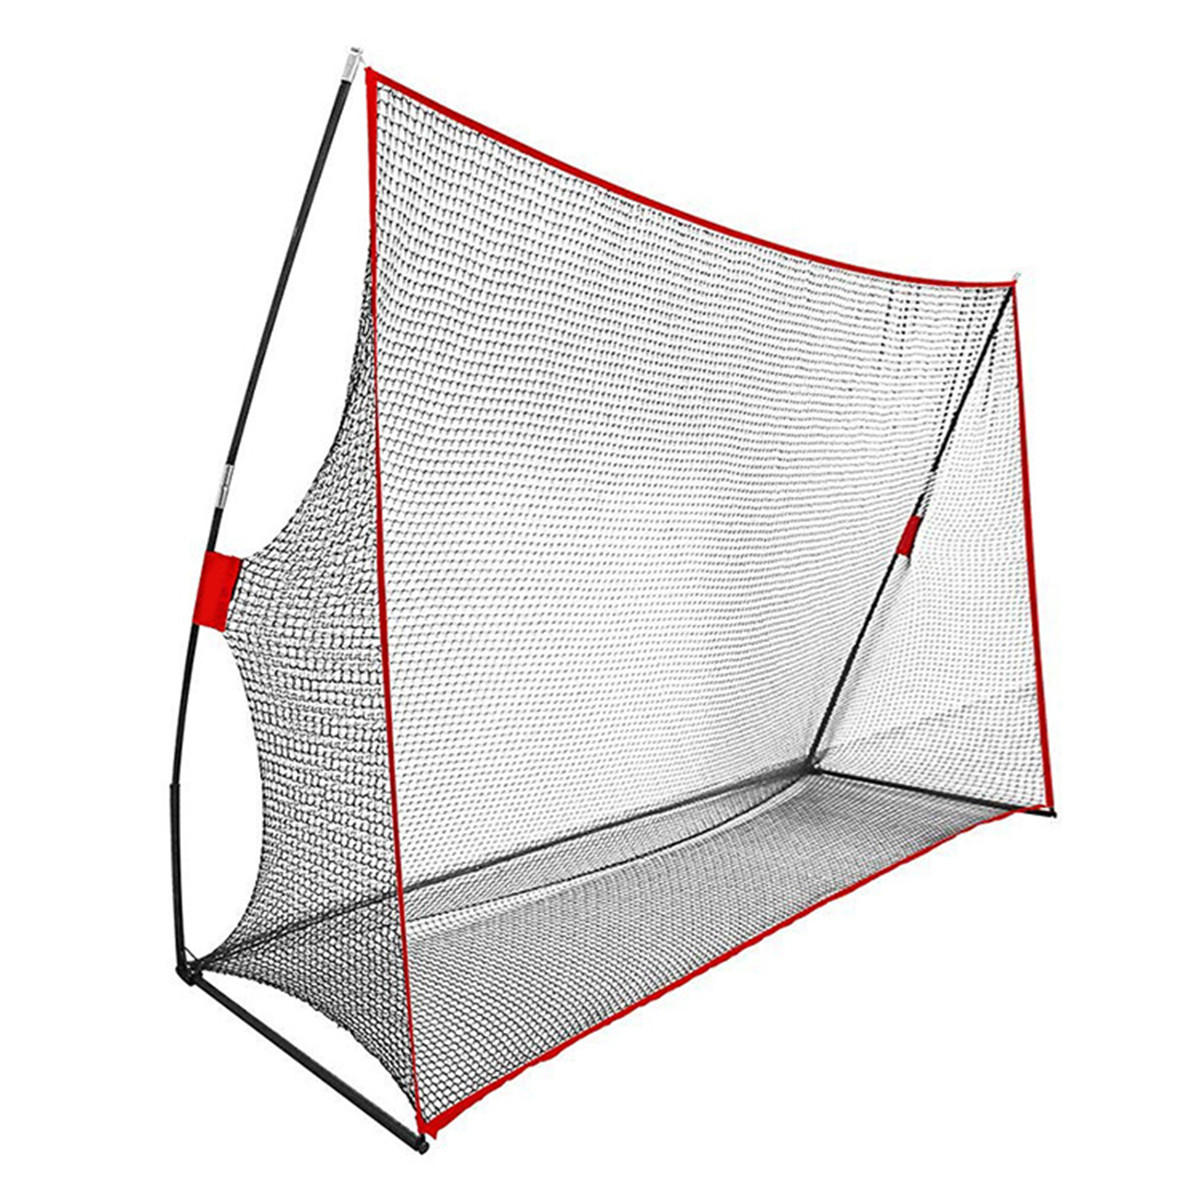 Image of 10 x 7FT Foldable Golf Hitting Practice Net Driving Training Aids Carry Bag Storage Net